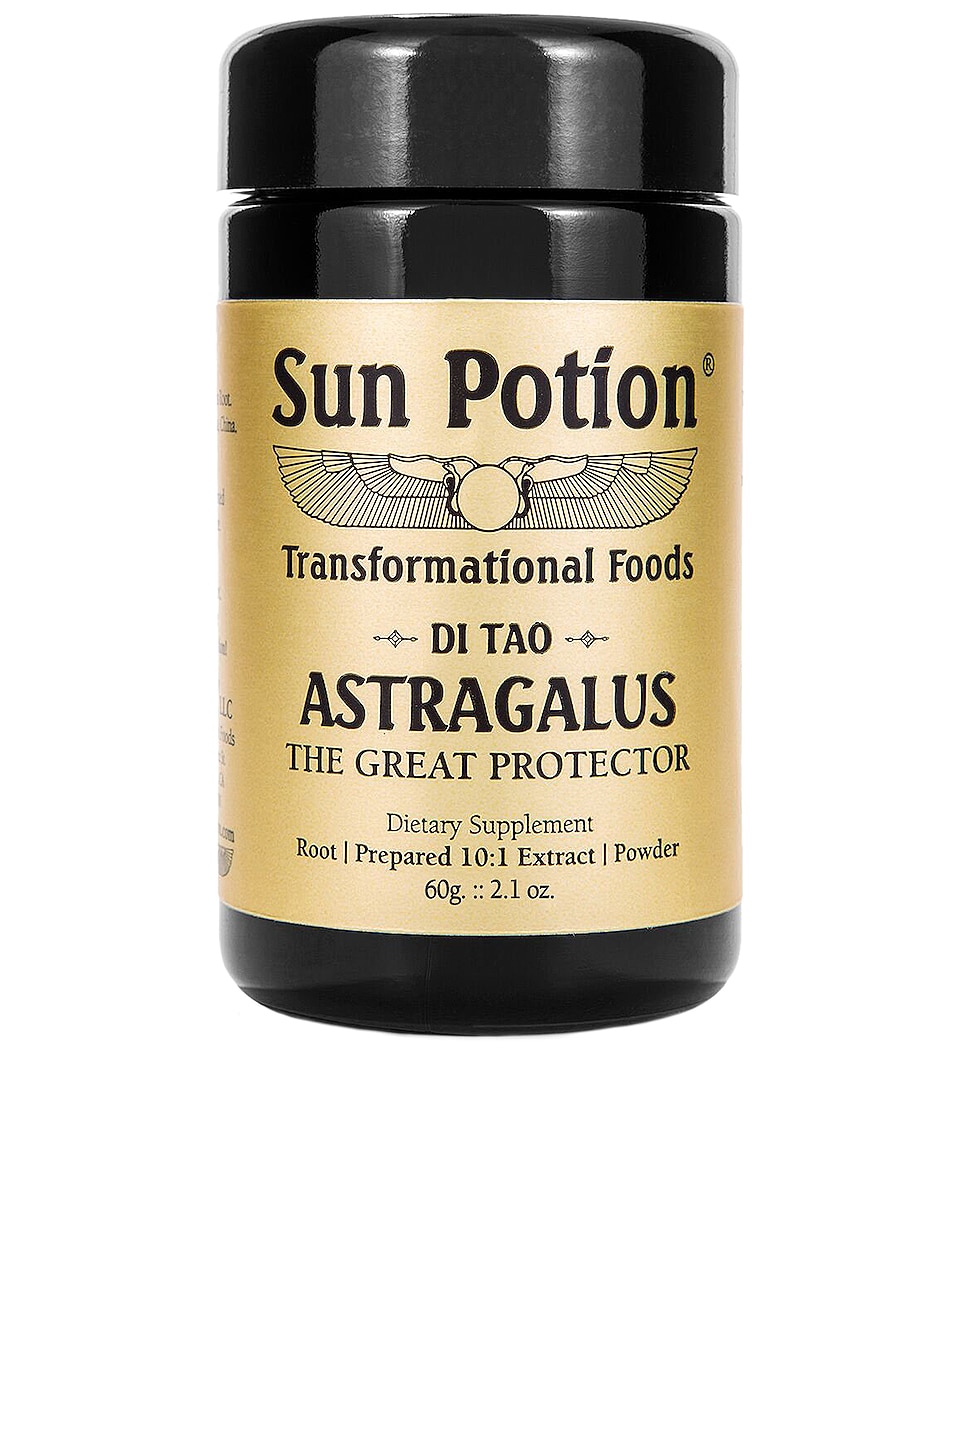 Sun Potion Astragalus The Great Protector Powder In N,a